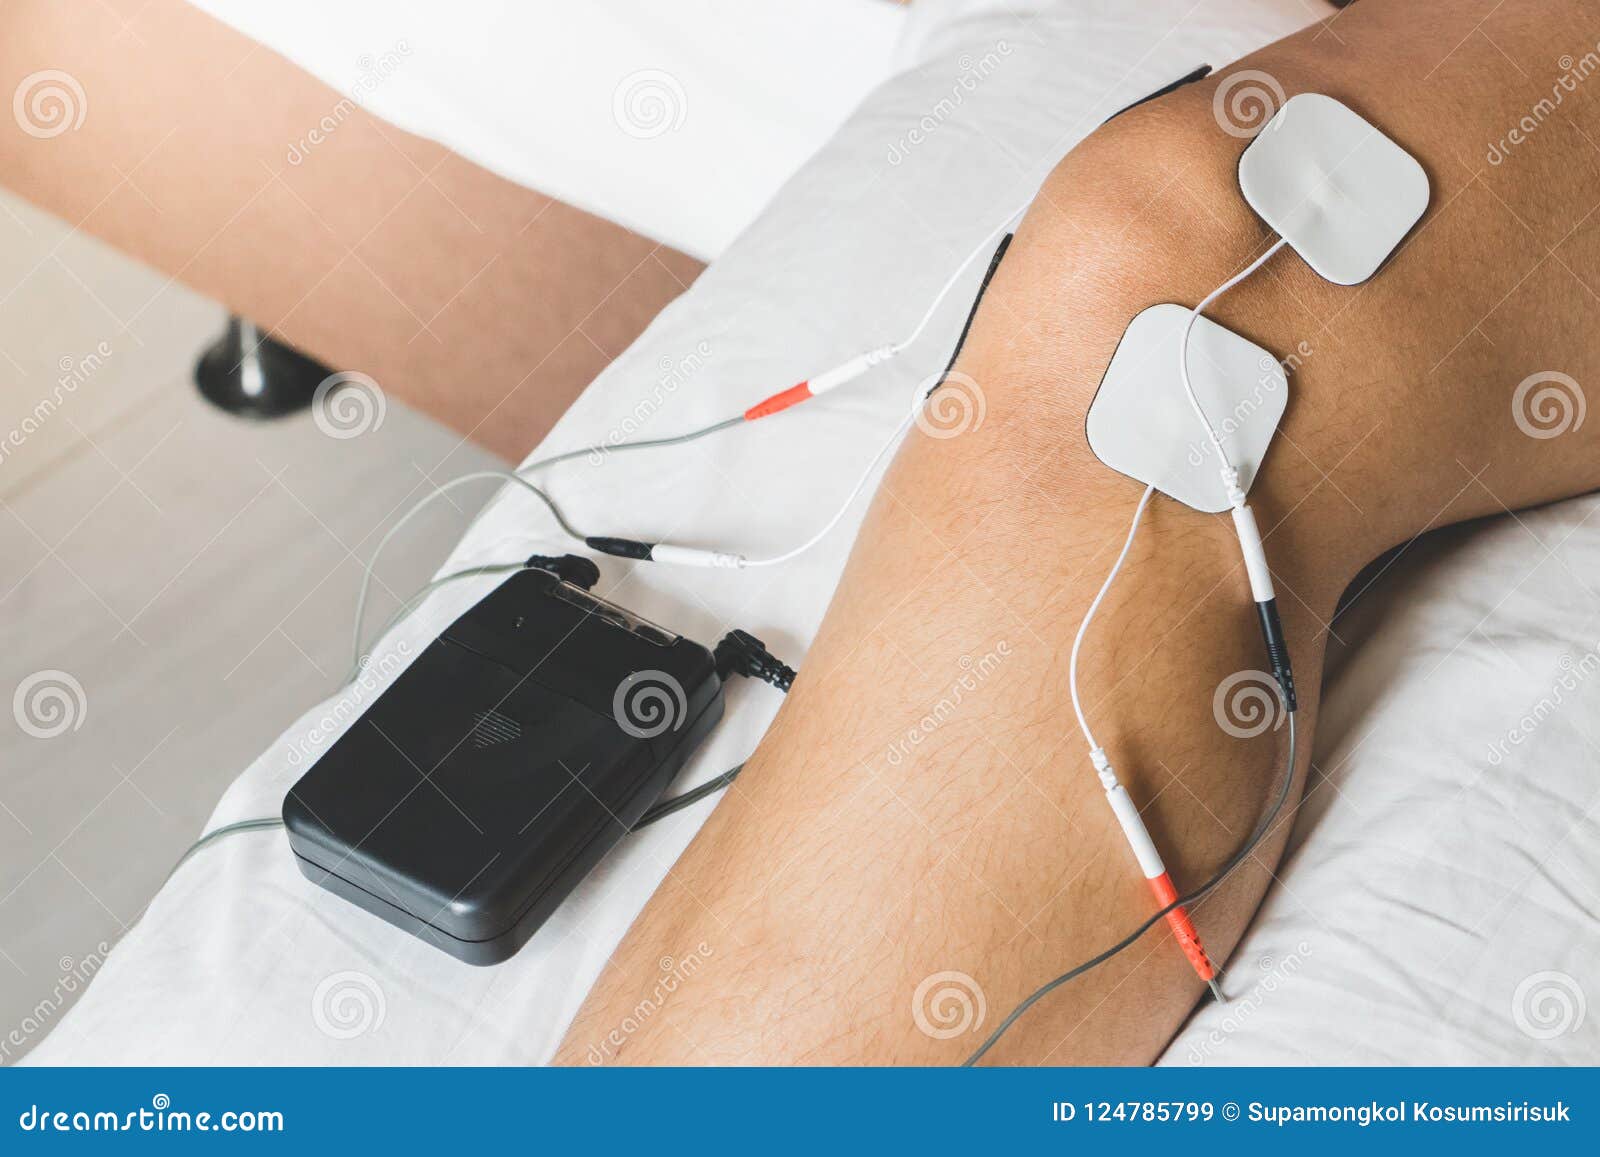 https://thumbs.dreamstime.com/z/patient-applying-electrical-stimulation-therapy-knee-joint-t-therapist-placing-electrodes-tens-124785799.jpg